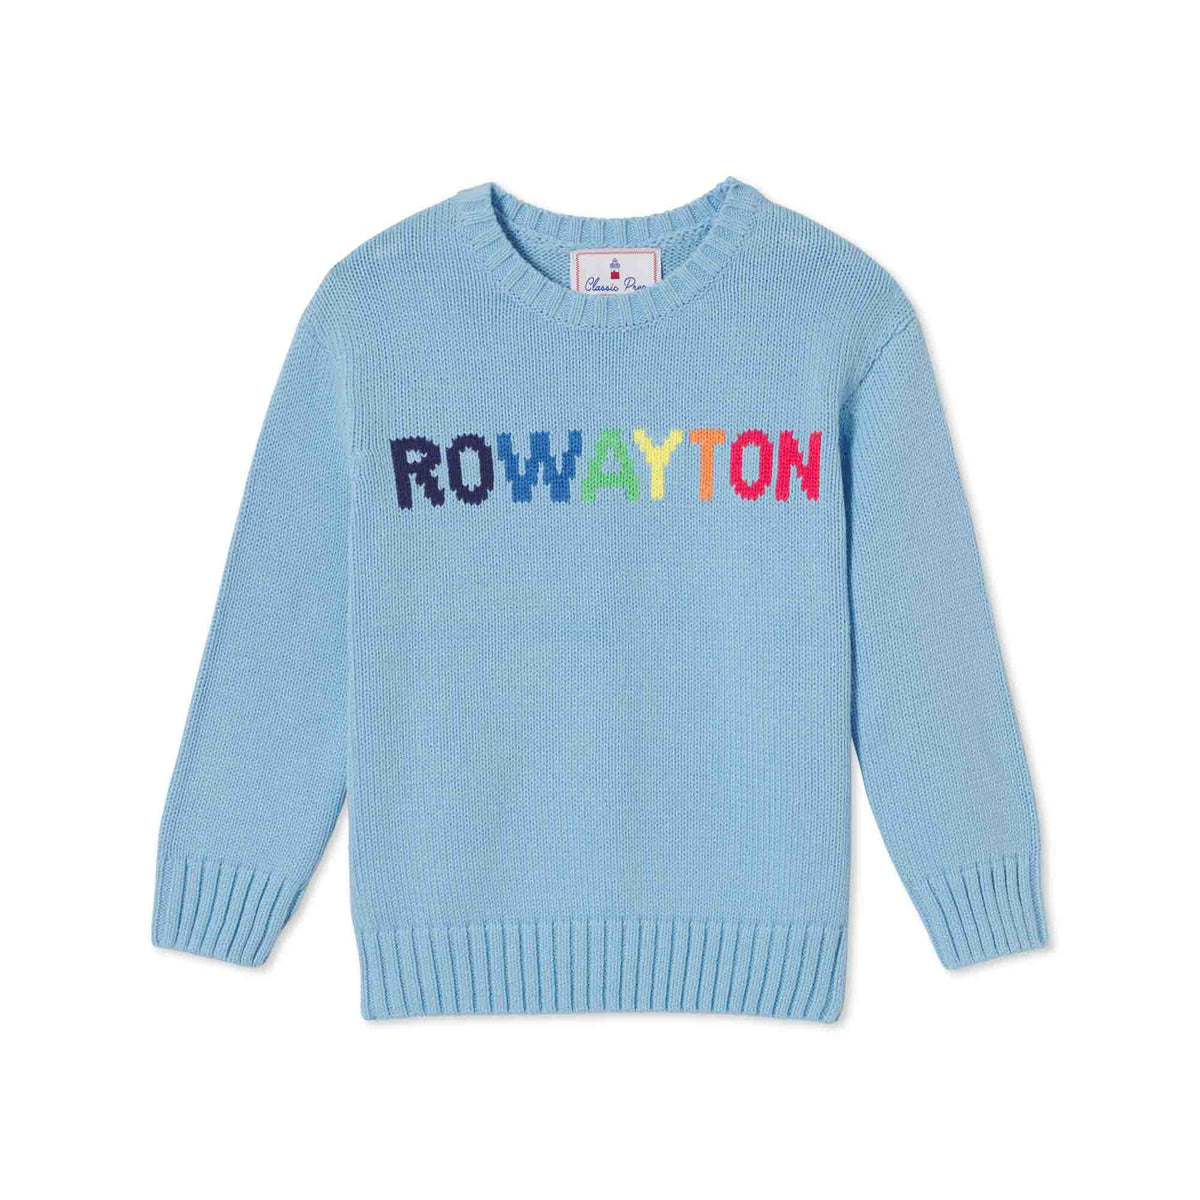 Classic and Preppy Charlie Rainbow Rowayton Sweater, Open Air-Sweaters-Open Air-2T-CPC - Classic Prep Childrenswear